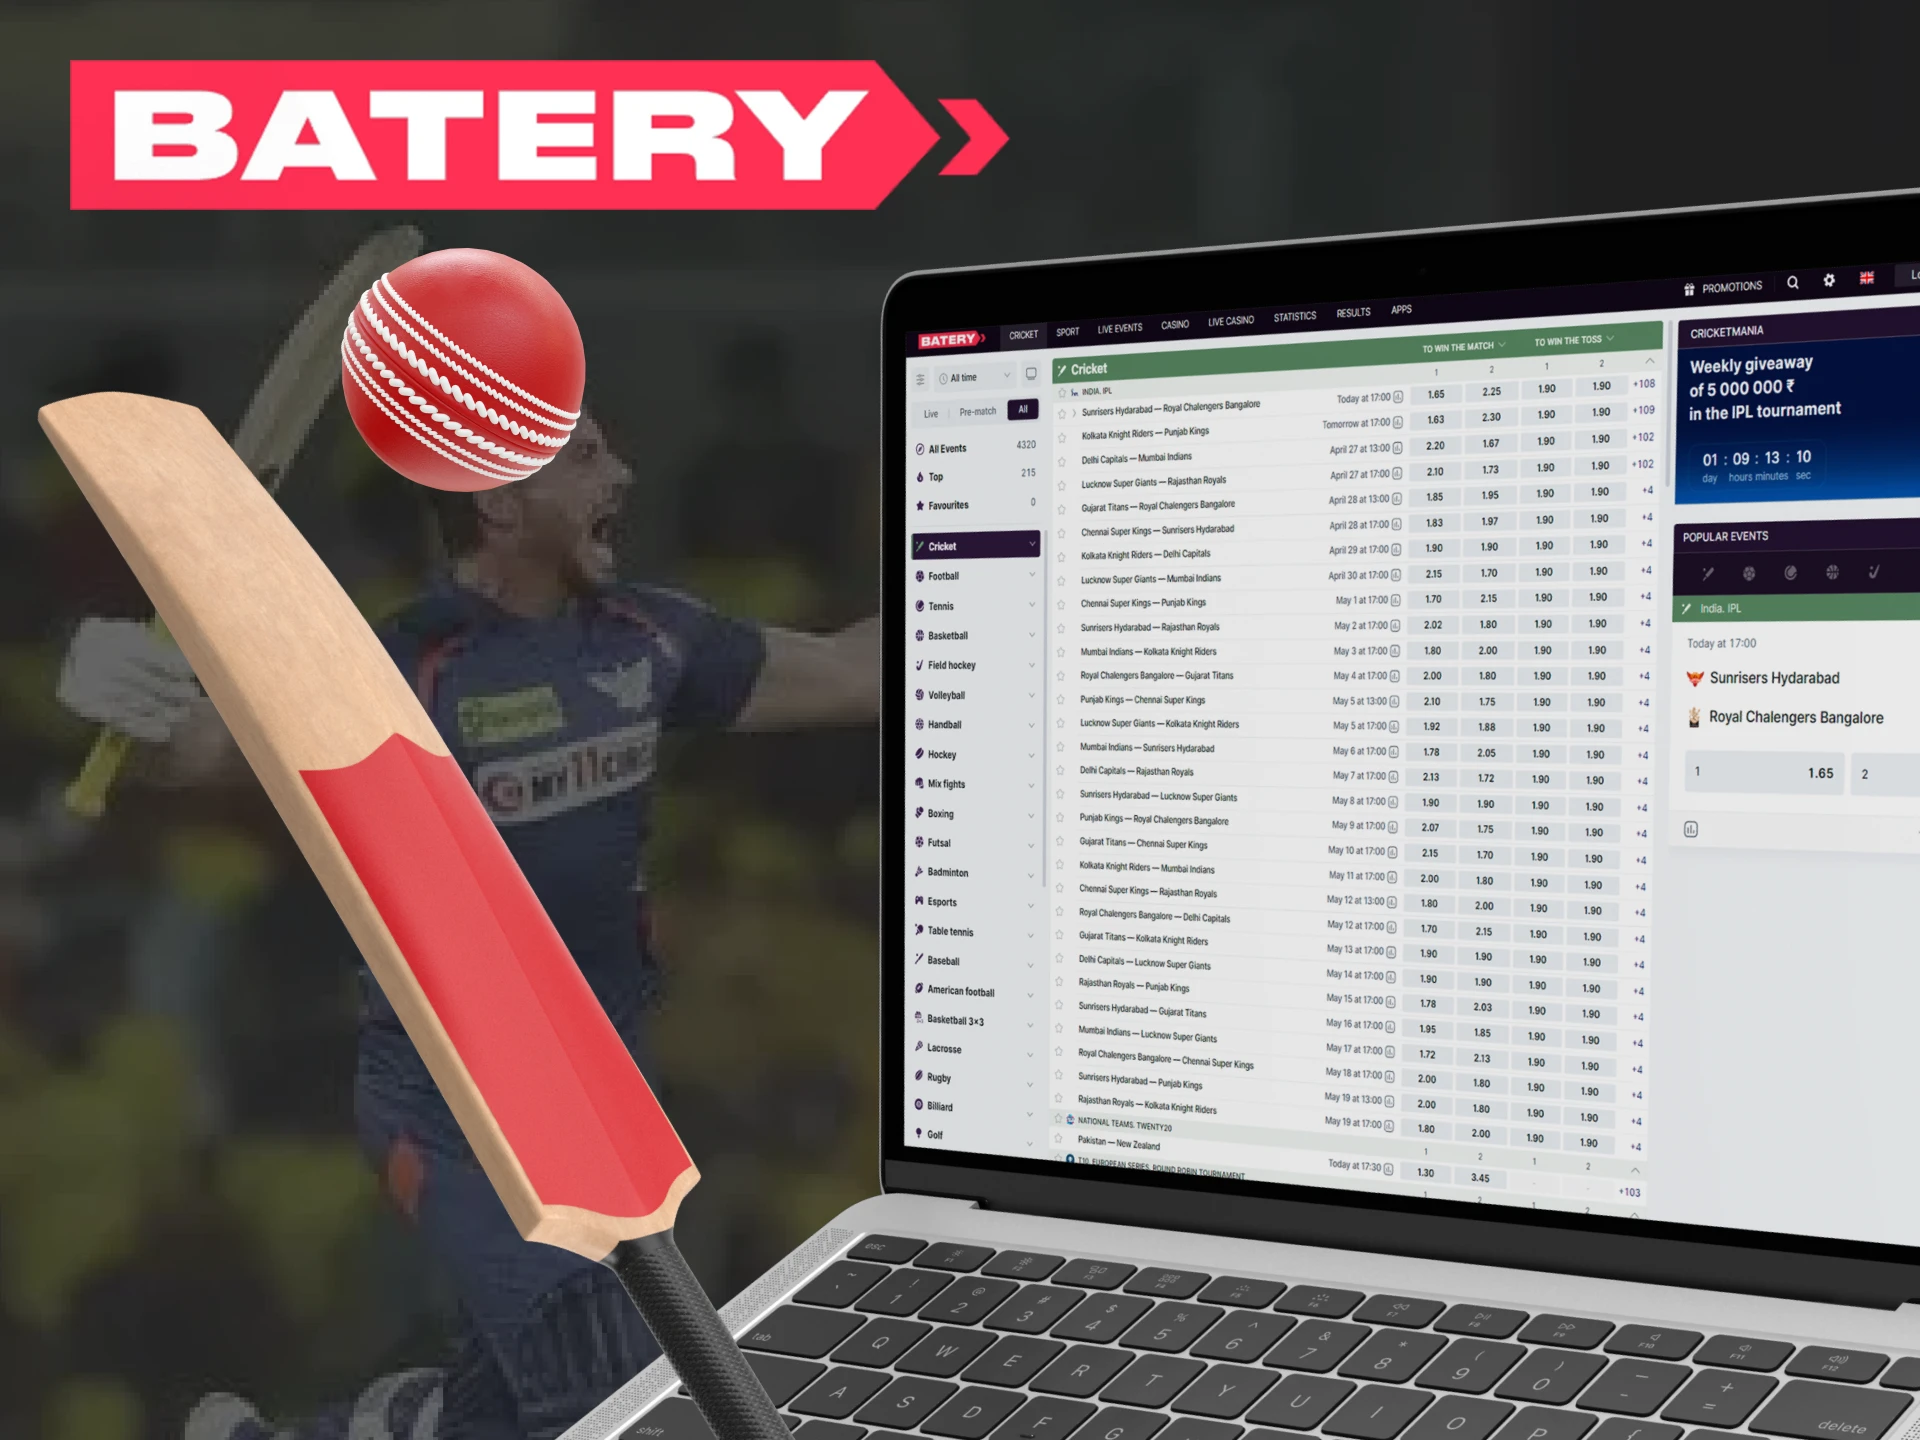 Place your bet on your favorite cricket team at Batery.